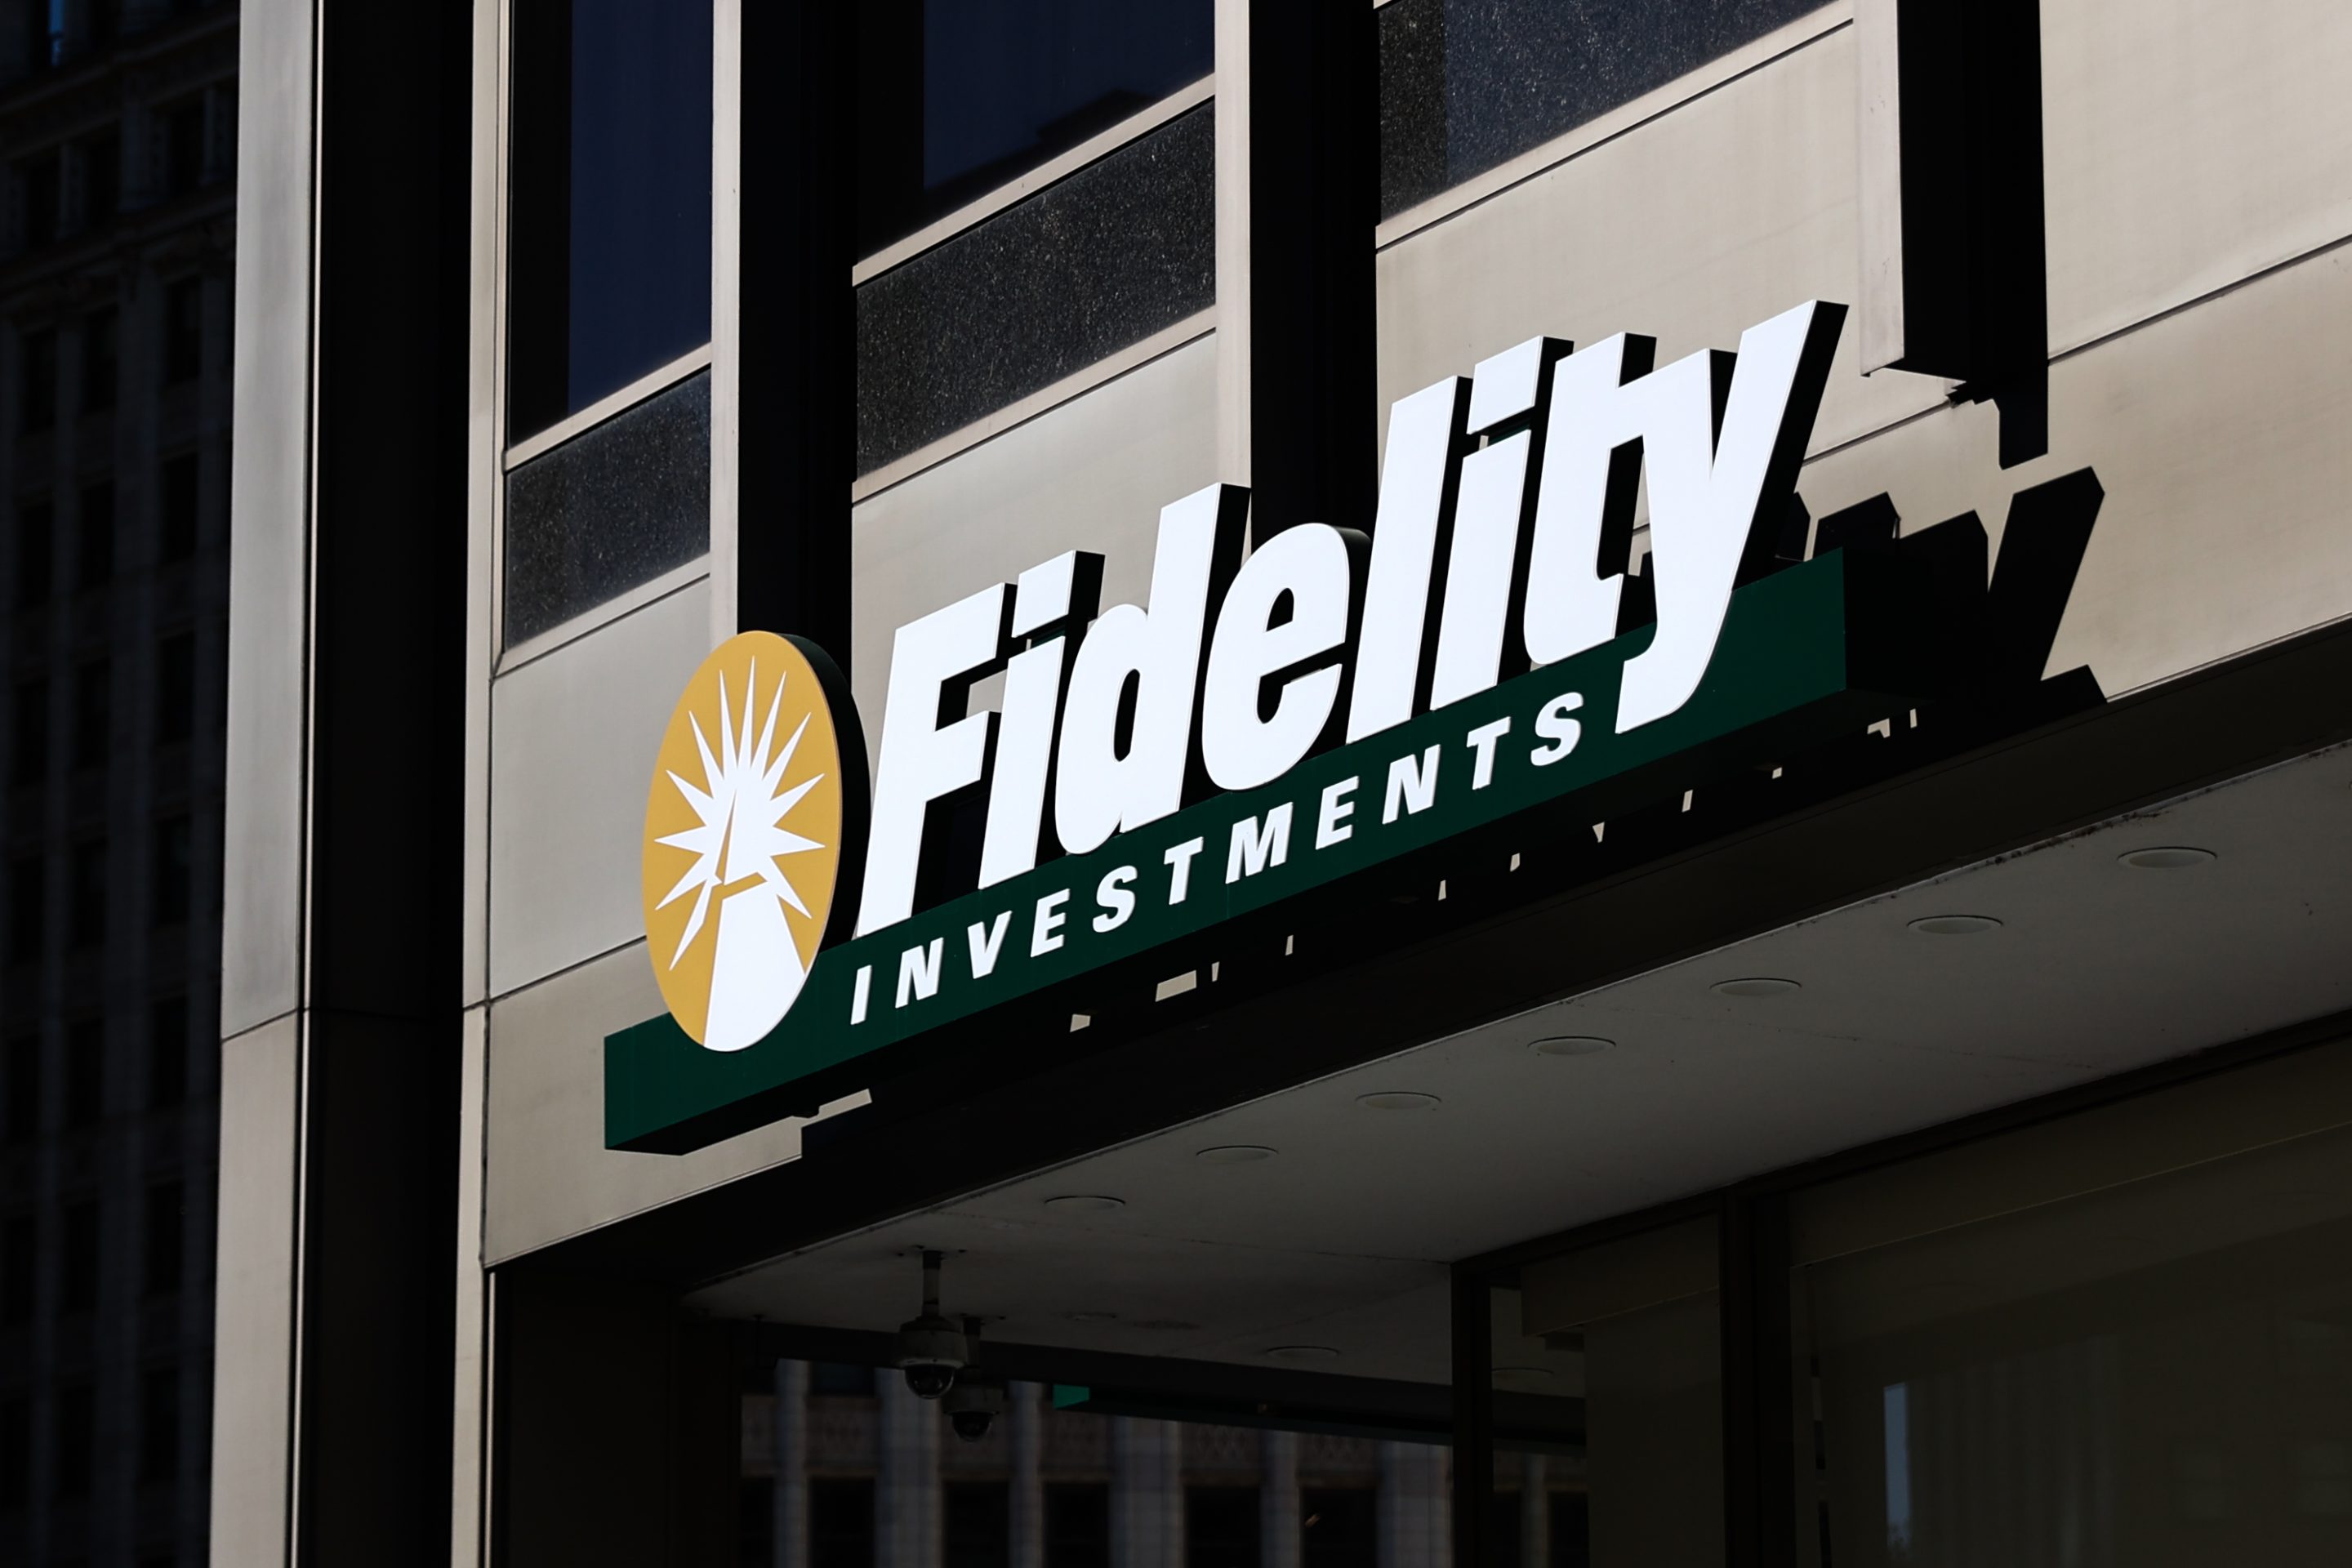 Bitcoin Is Fundamentally Different From Other Cryptocurrencies: Fidelity Digital Assets